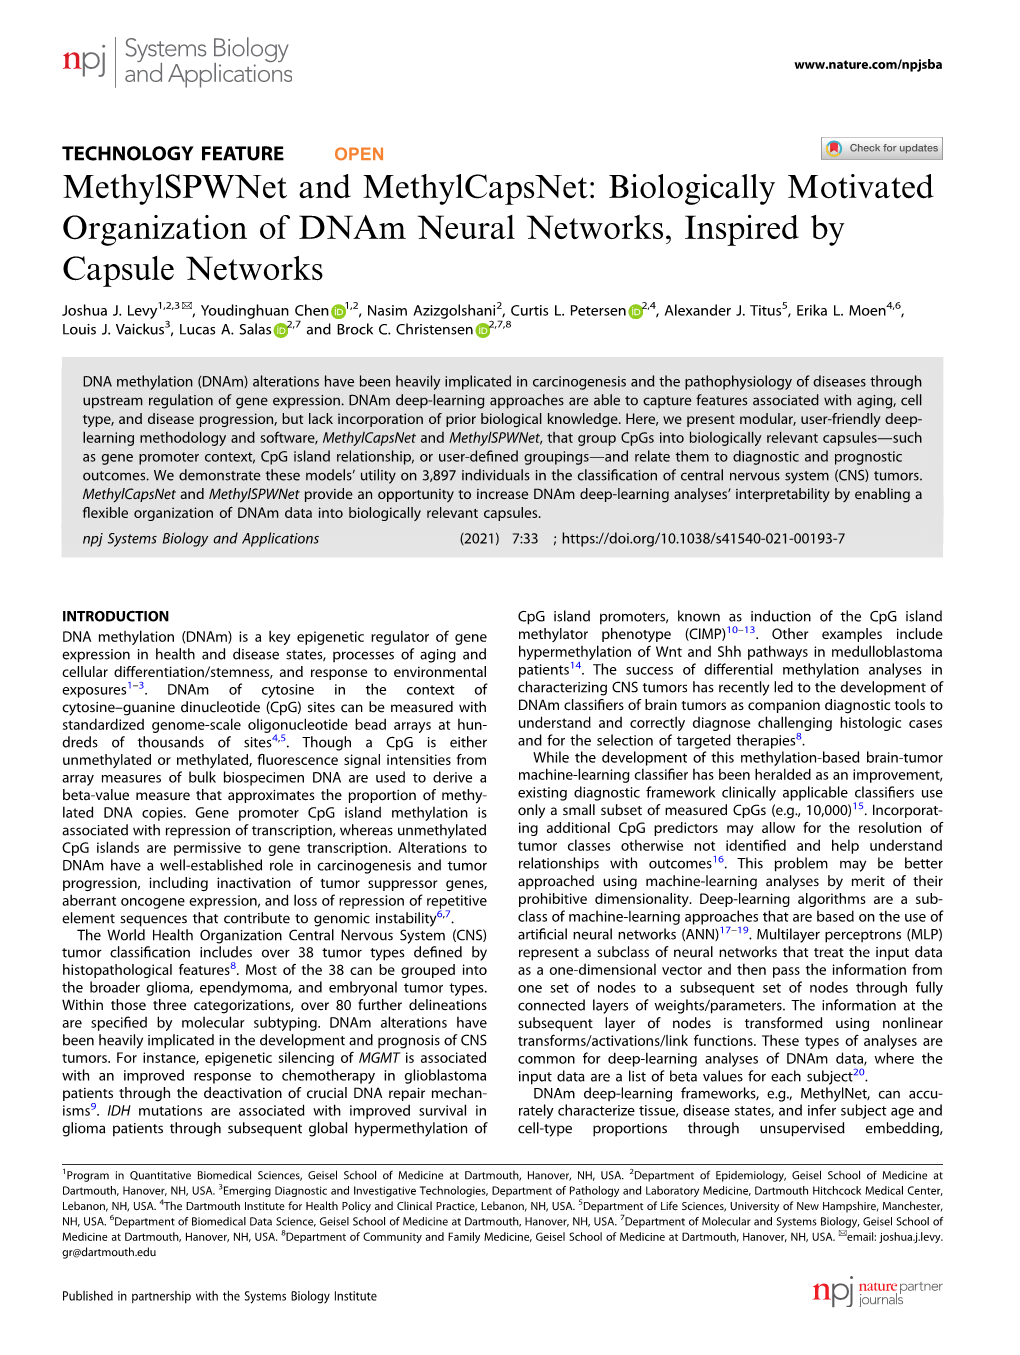 Methylspwnet and Methylcapsnet: Biologically Motivated Organization of Dnam Neural Networks, Inspired by Capsule Networks ✉ Joshua J